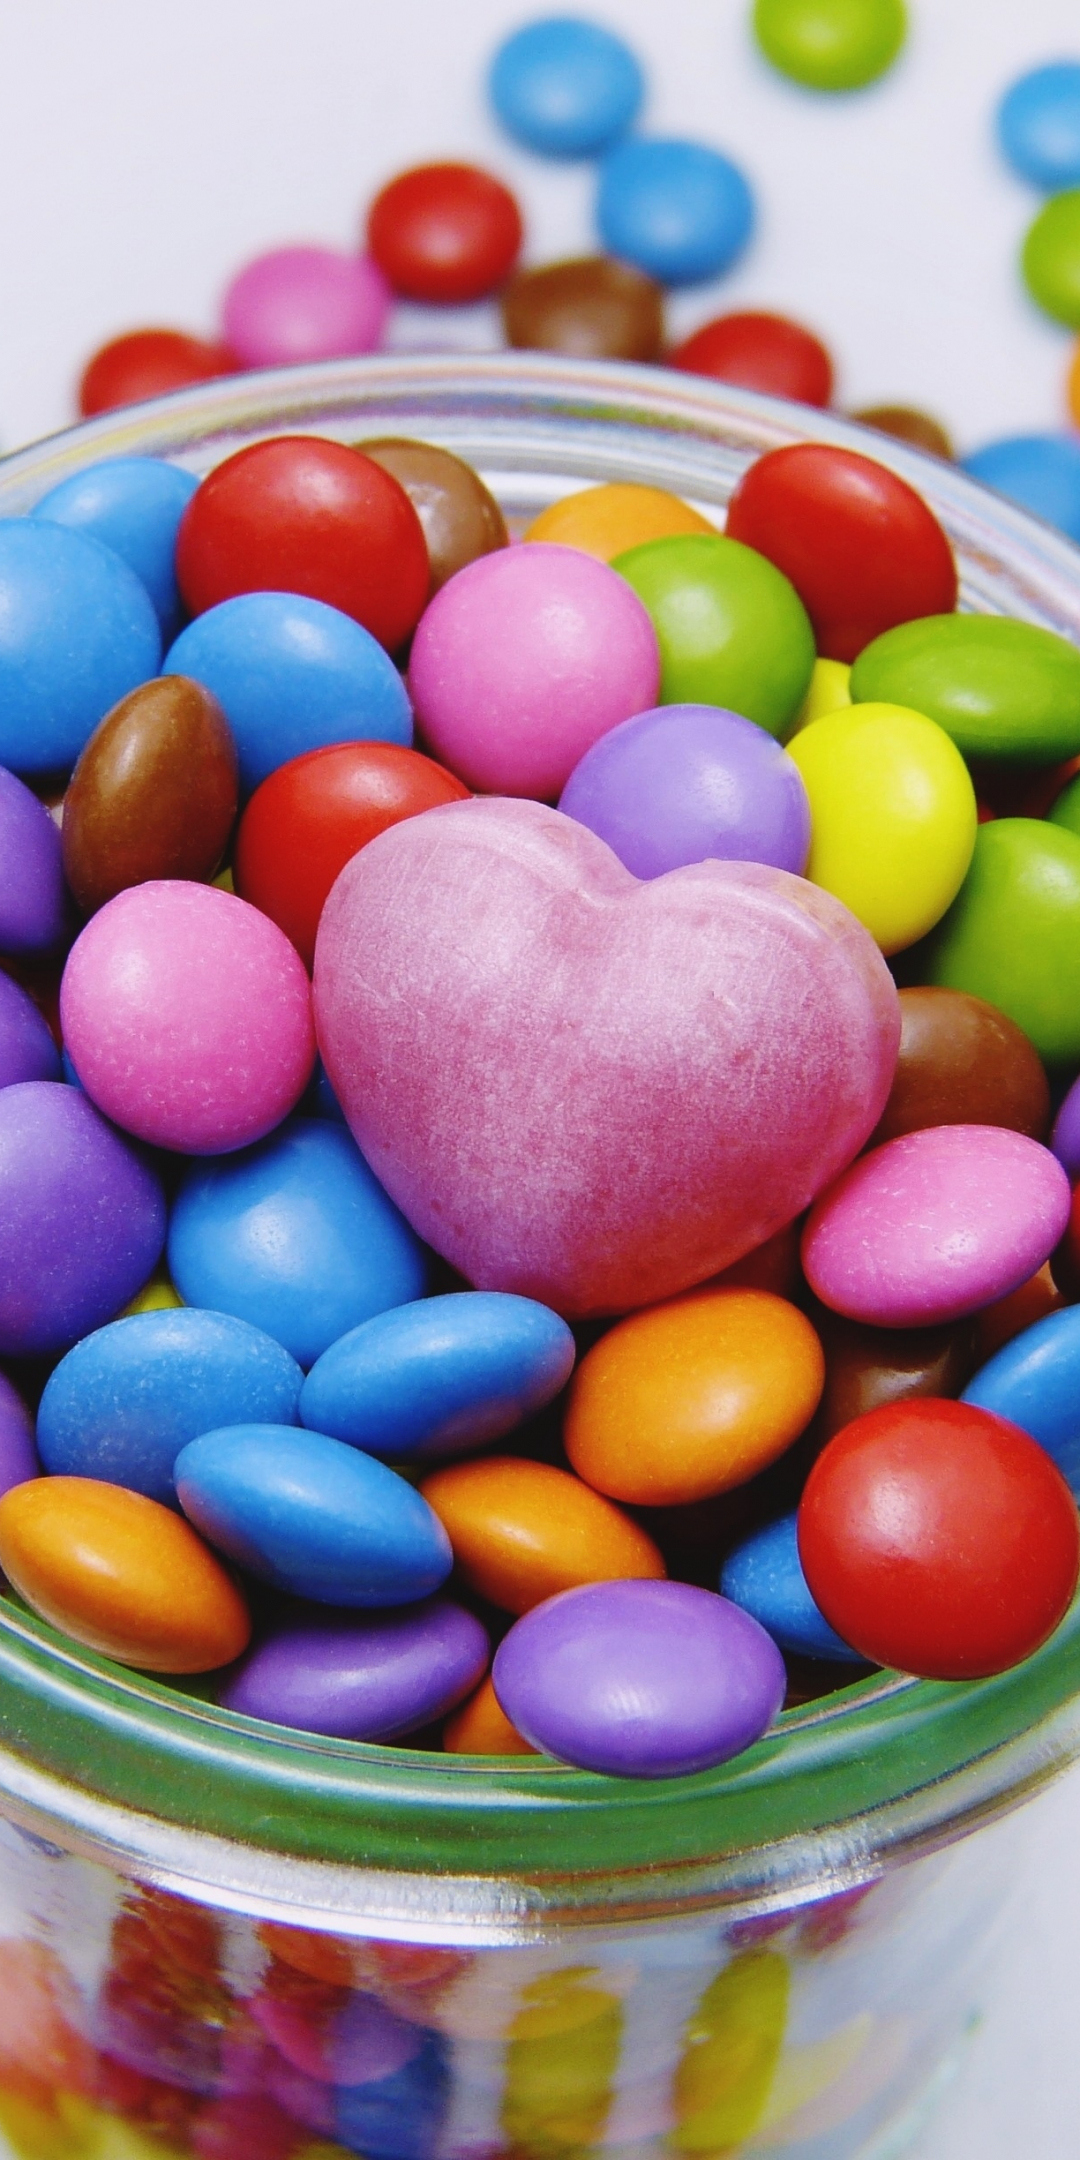 Colorful, sweet candies, chocolate, 1080x2160 wallpaper